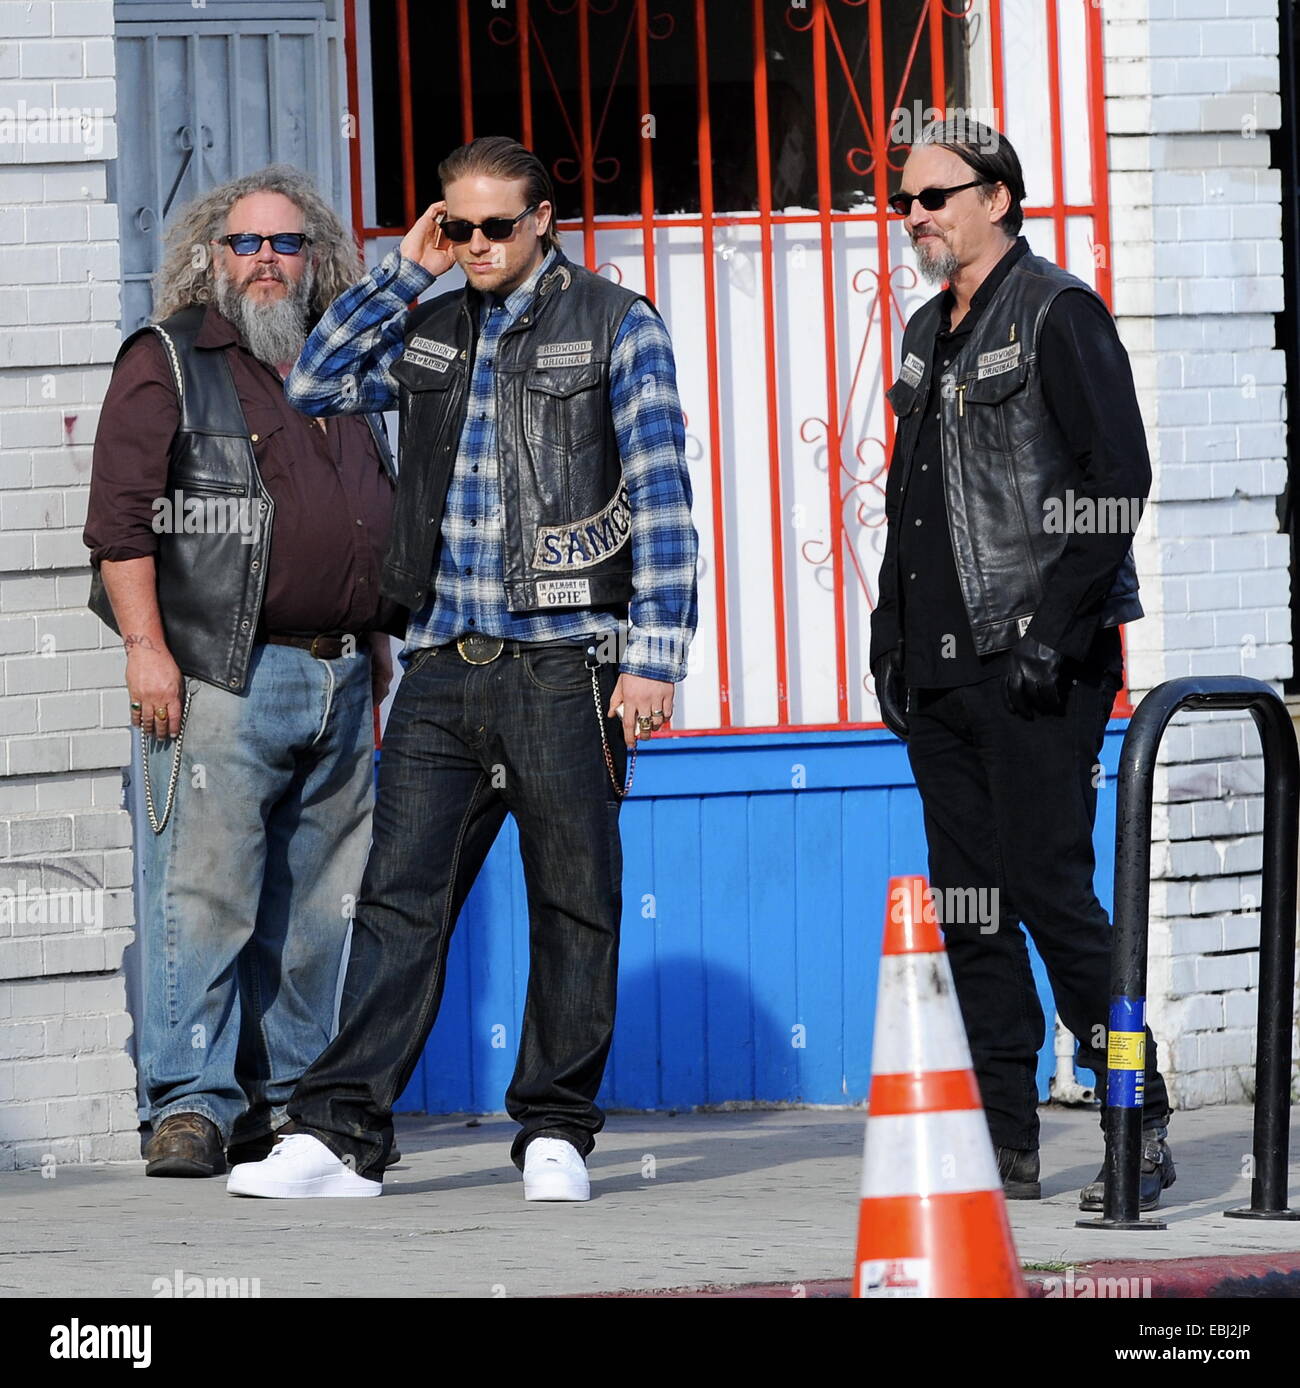 Charlie Hunnam hops on his bike on the set of 'Sons Of Anarchy' after taking time off to film his new movie Crimson Peak in Canada. The uk actor was seen fooling around with the rest of the cast as they film the last season to their hit biker show.  Featu Stock Photo